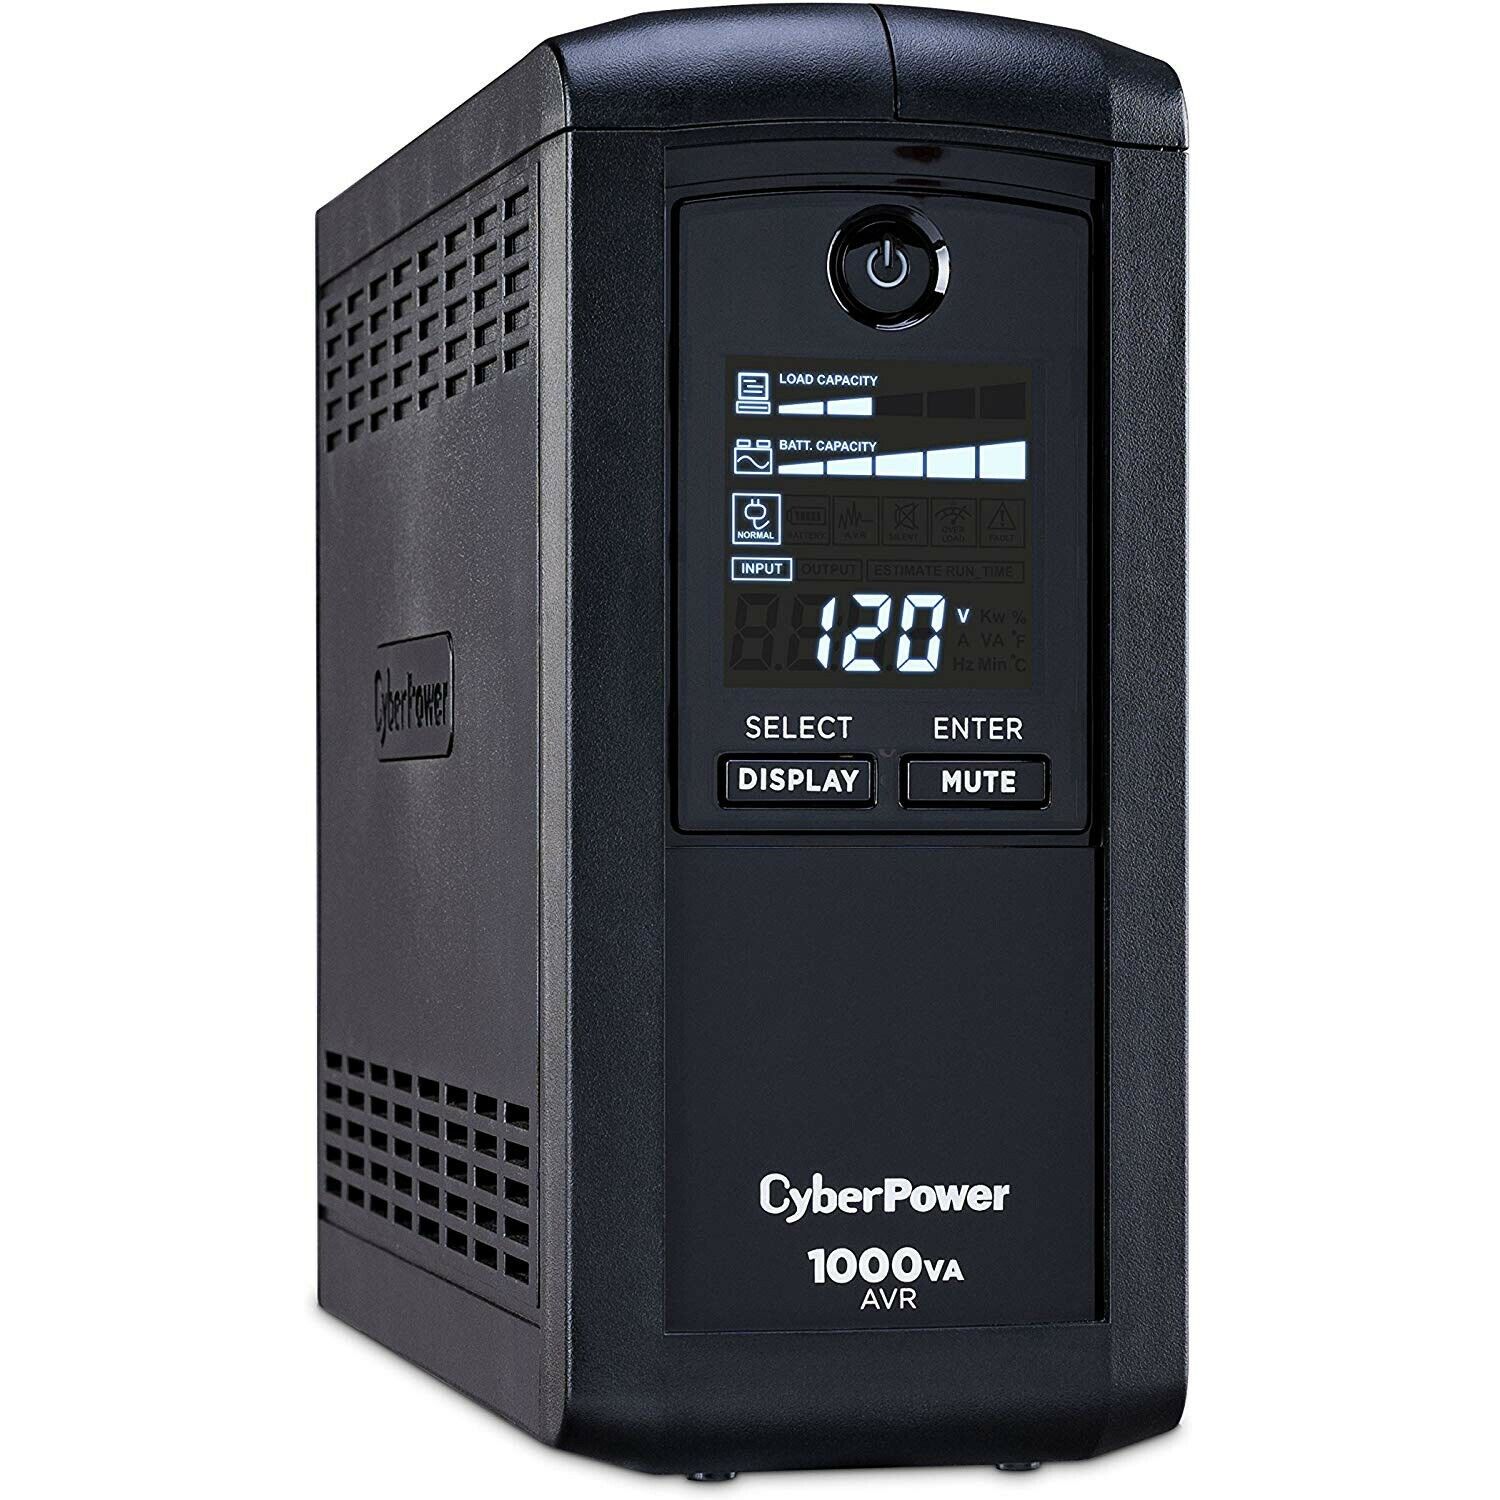 CyberPower CP1000AVRLCD Intelligent LCD UPS System, 1000VA/600W, 9 Outlets